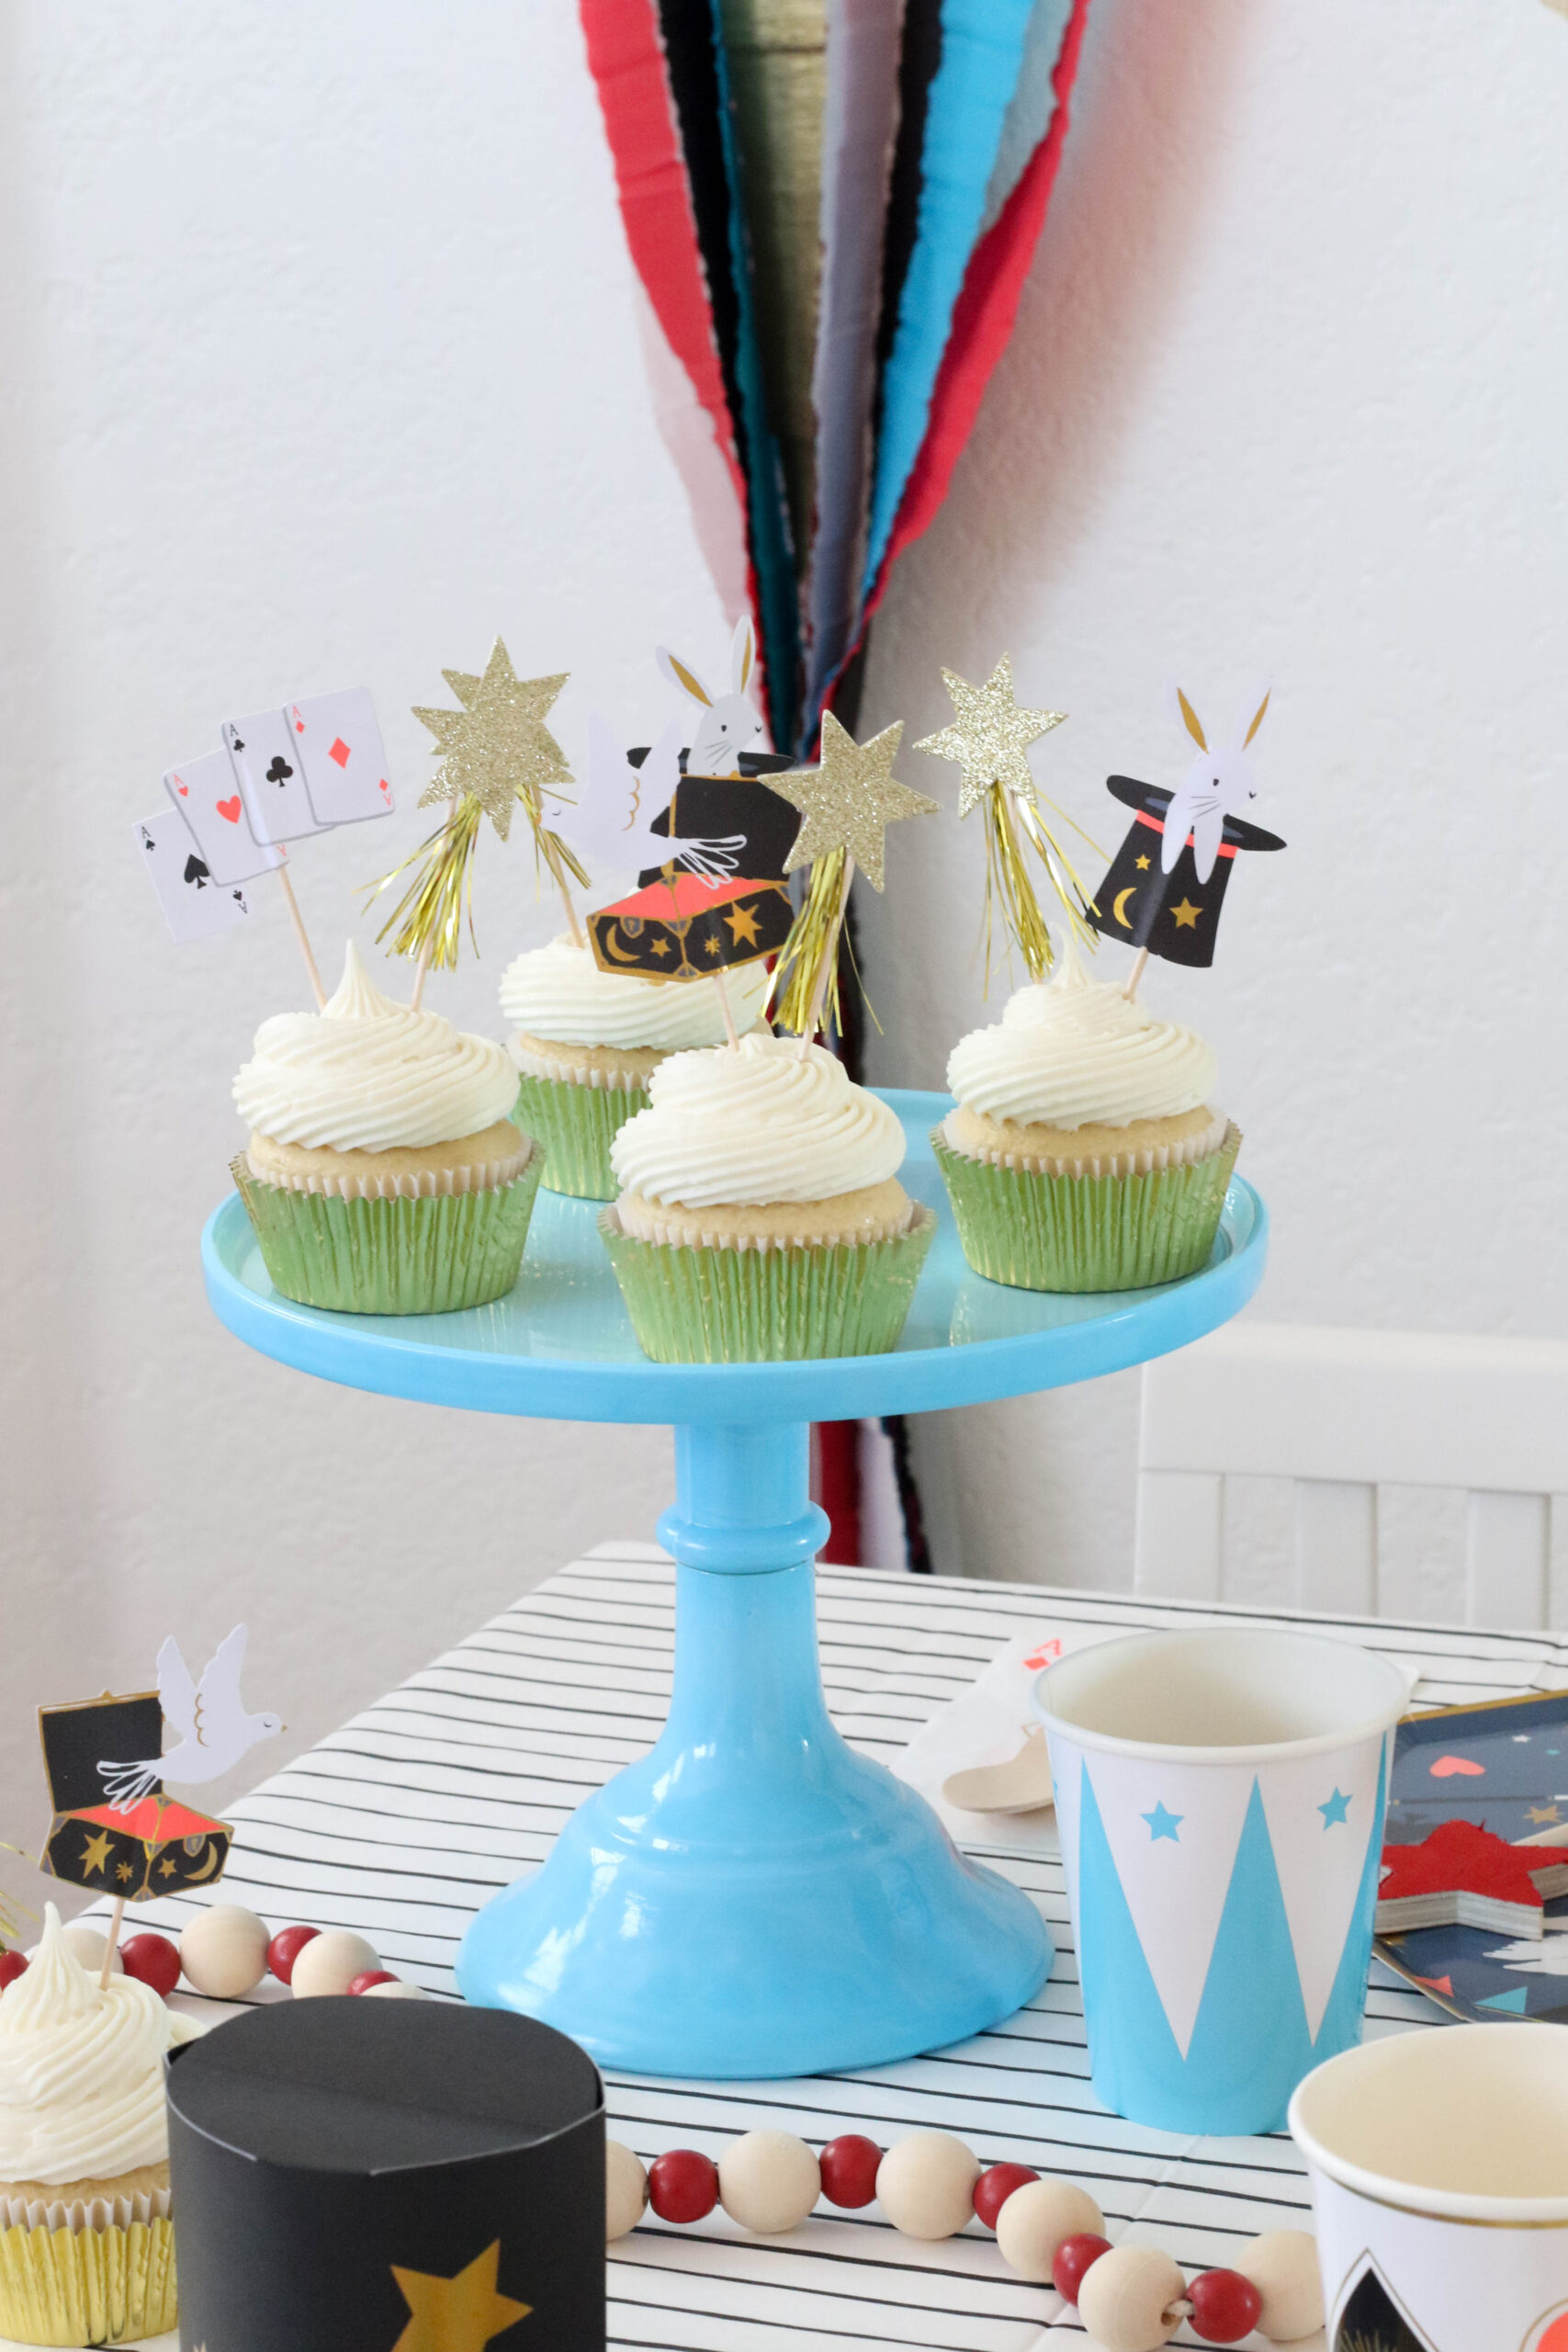 Fantastic Magic Themed Birthday Party Ideas The Kids Will